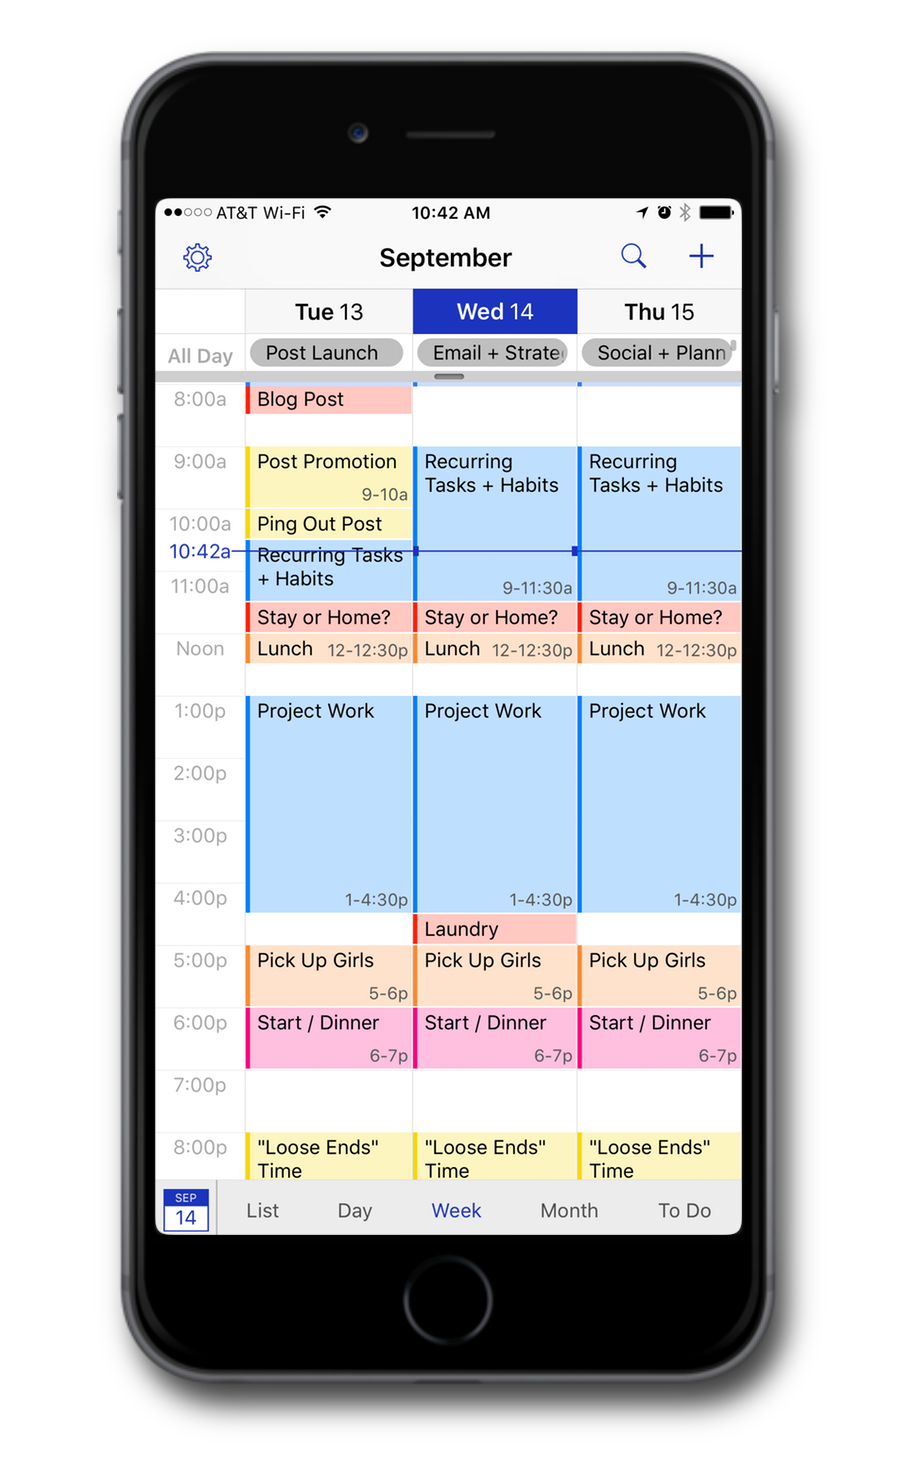 Example schedule of Daily Themes and Time Blocks to break up the day for your best use of time.